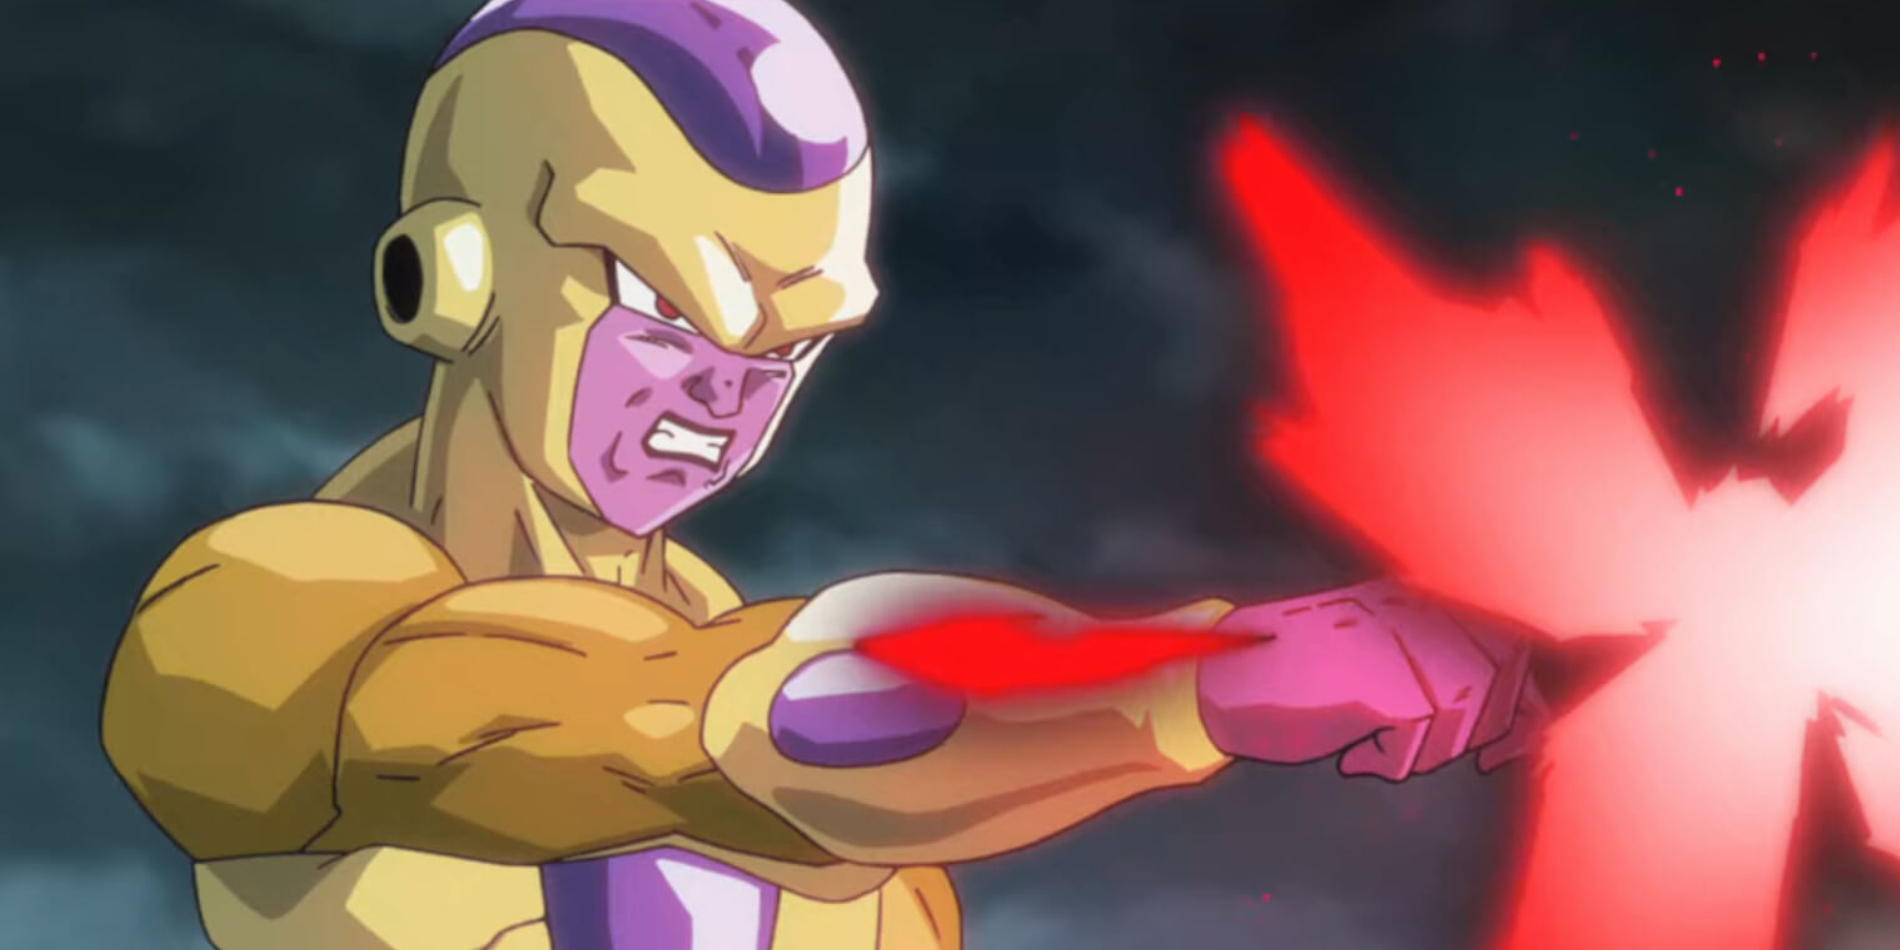 Frieza in his Golden Form has red light coming out of his hand.